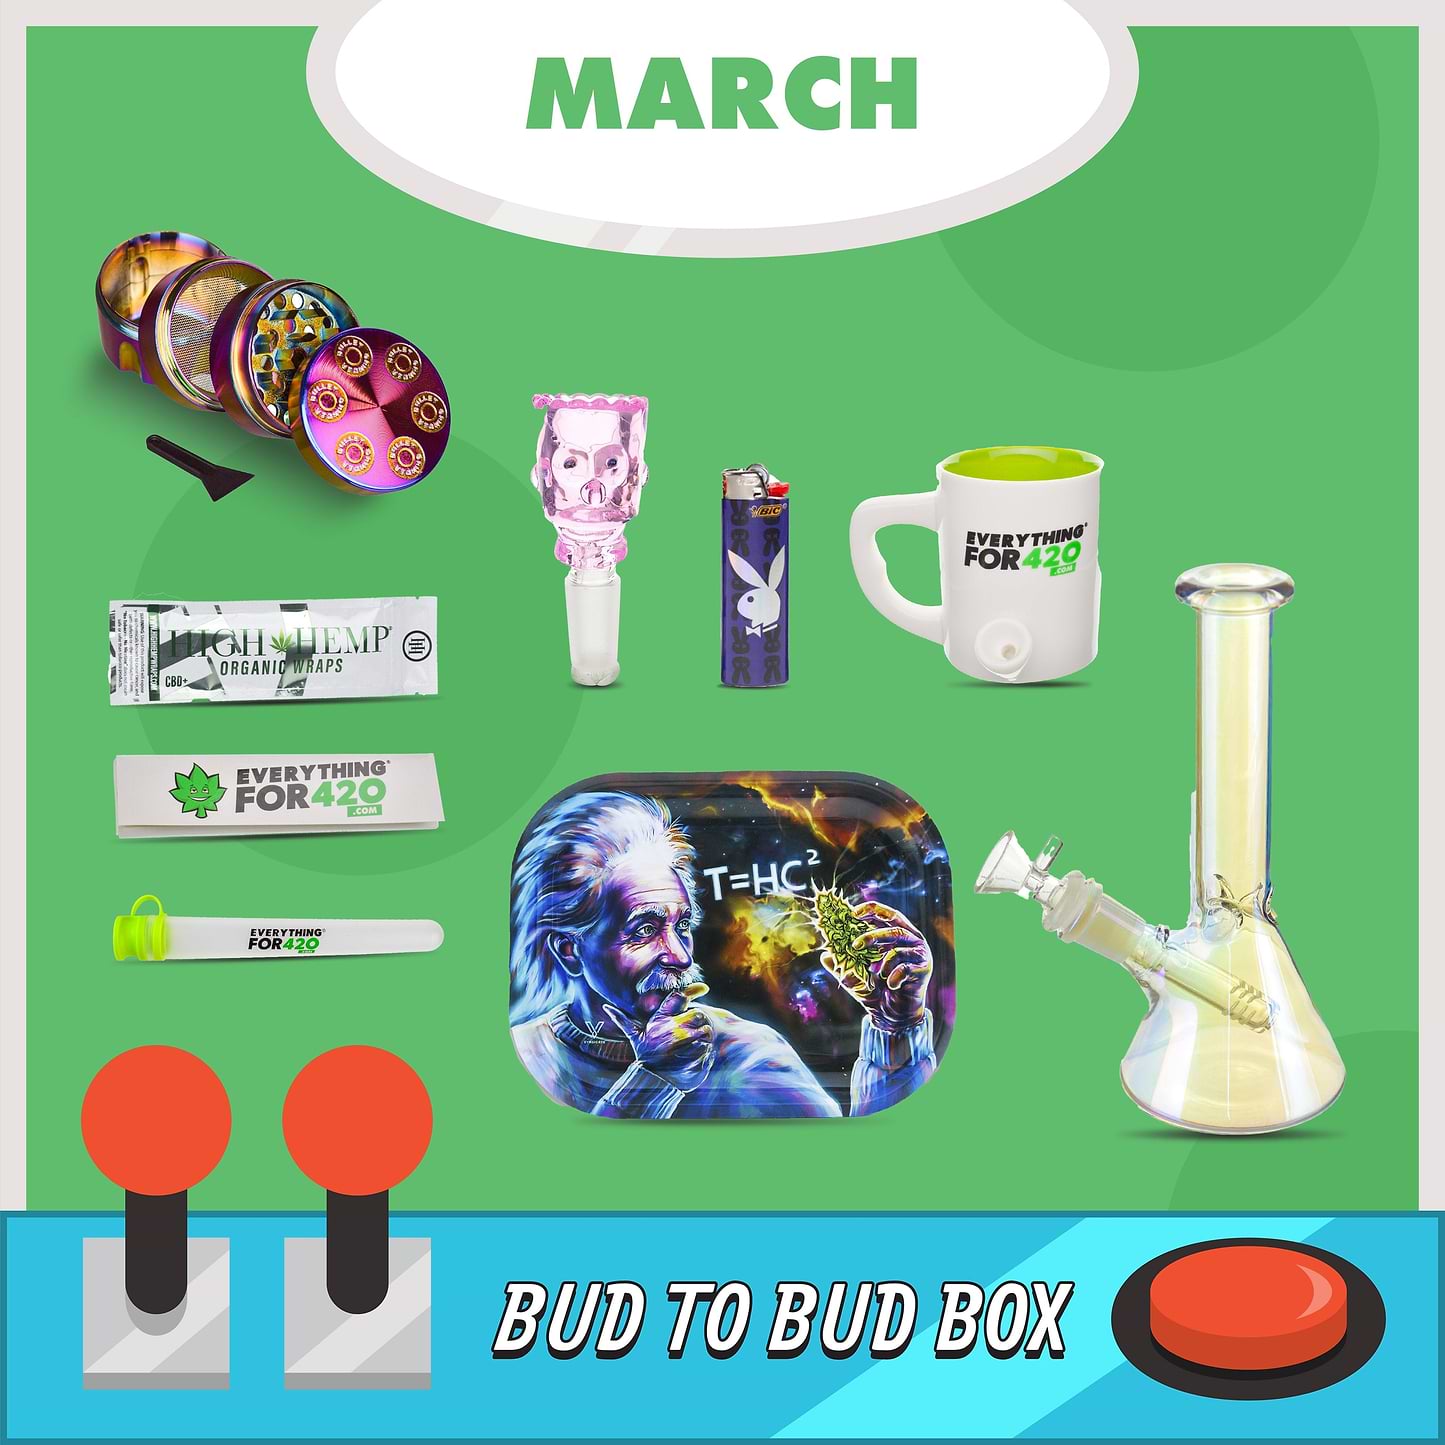 The March Bud to Bud Box